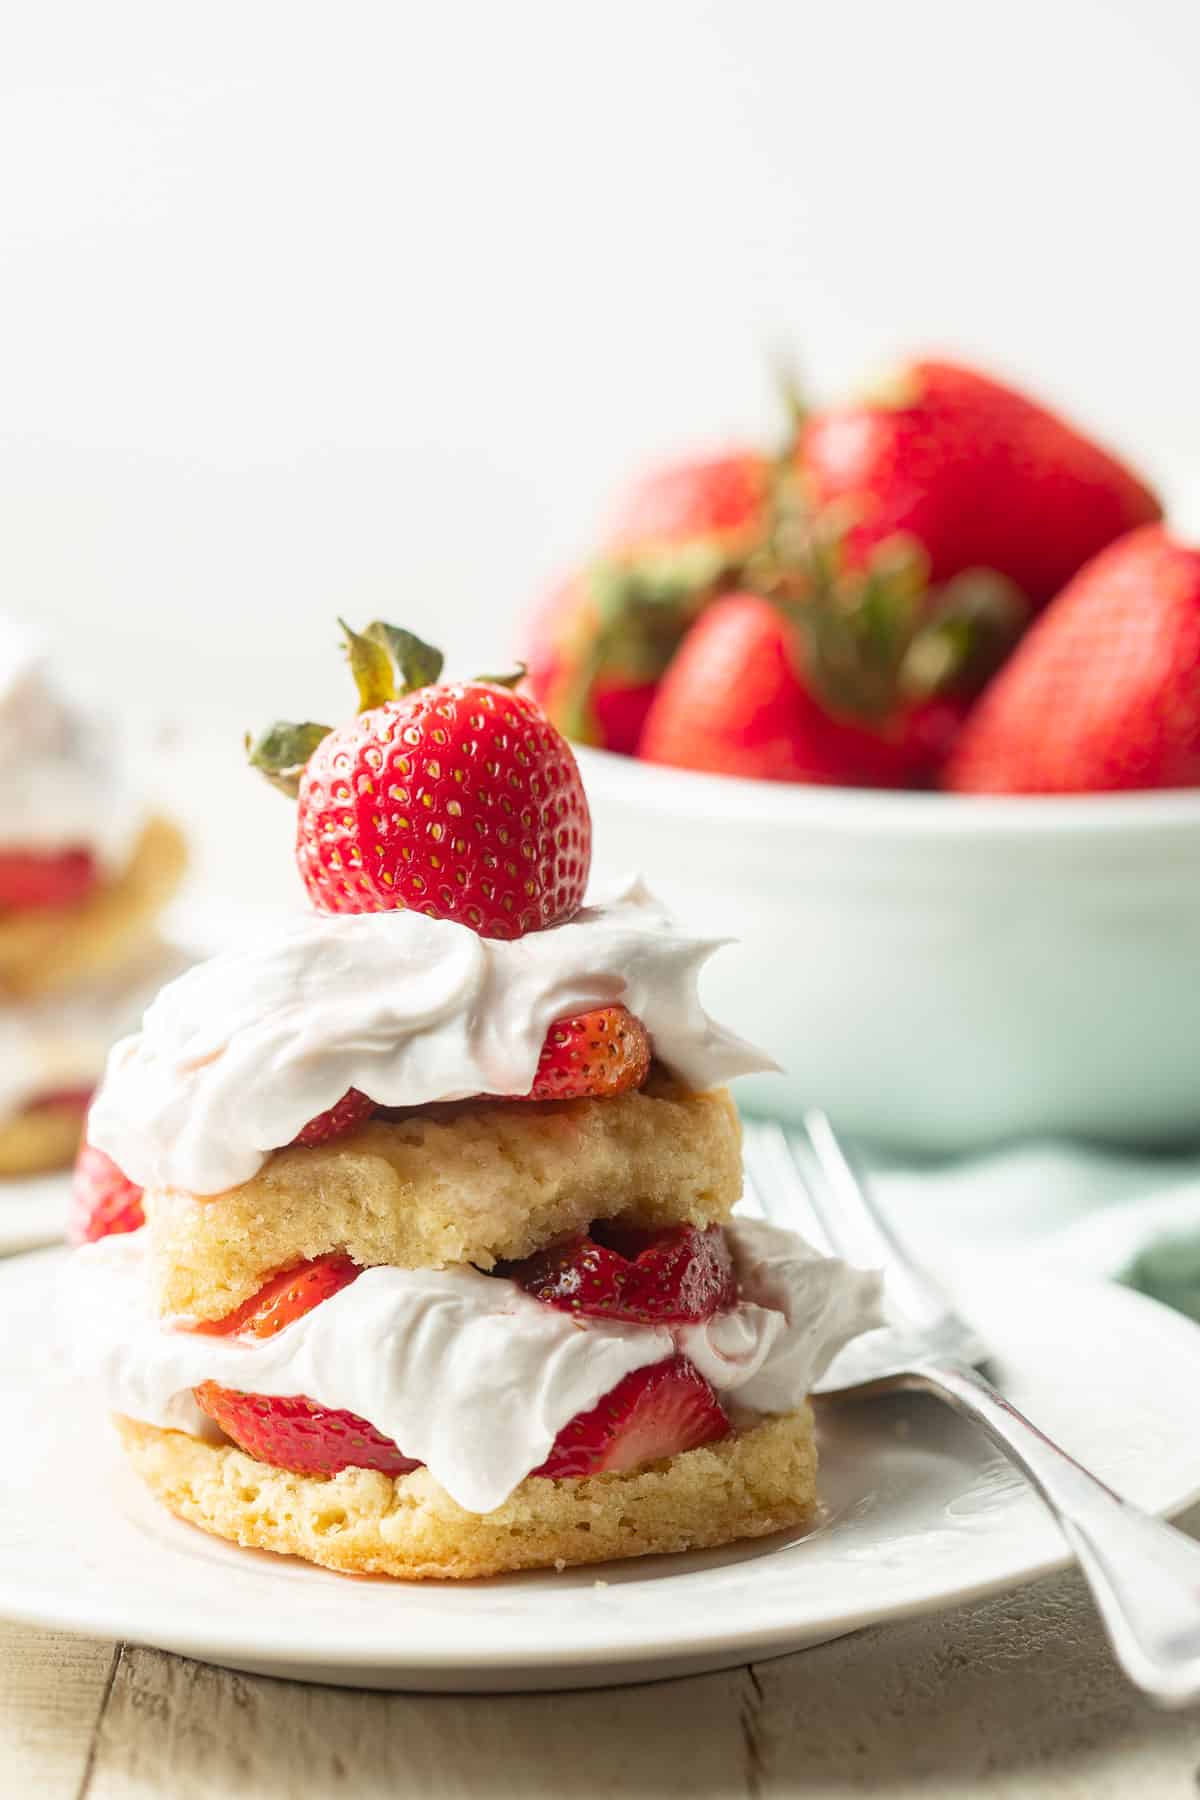 Vegan Strawberry Shortcake on a plate with a bowl of strawberries in the background.